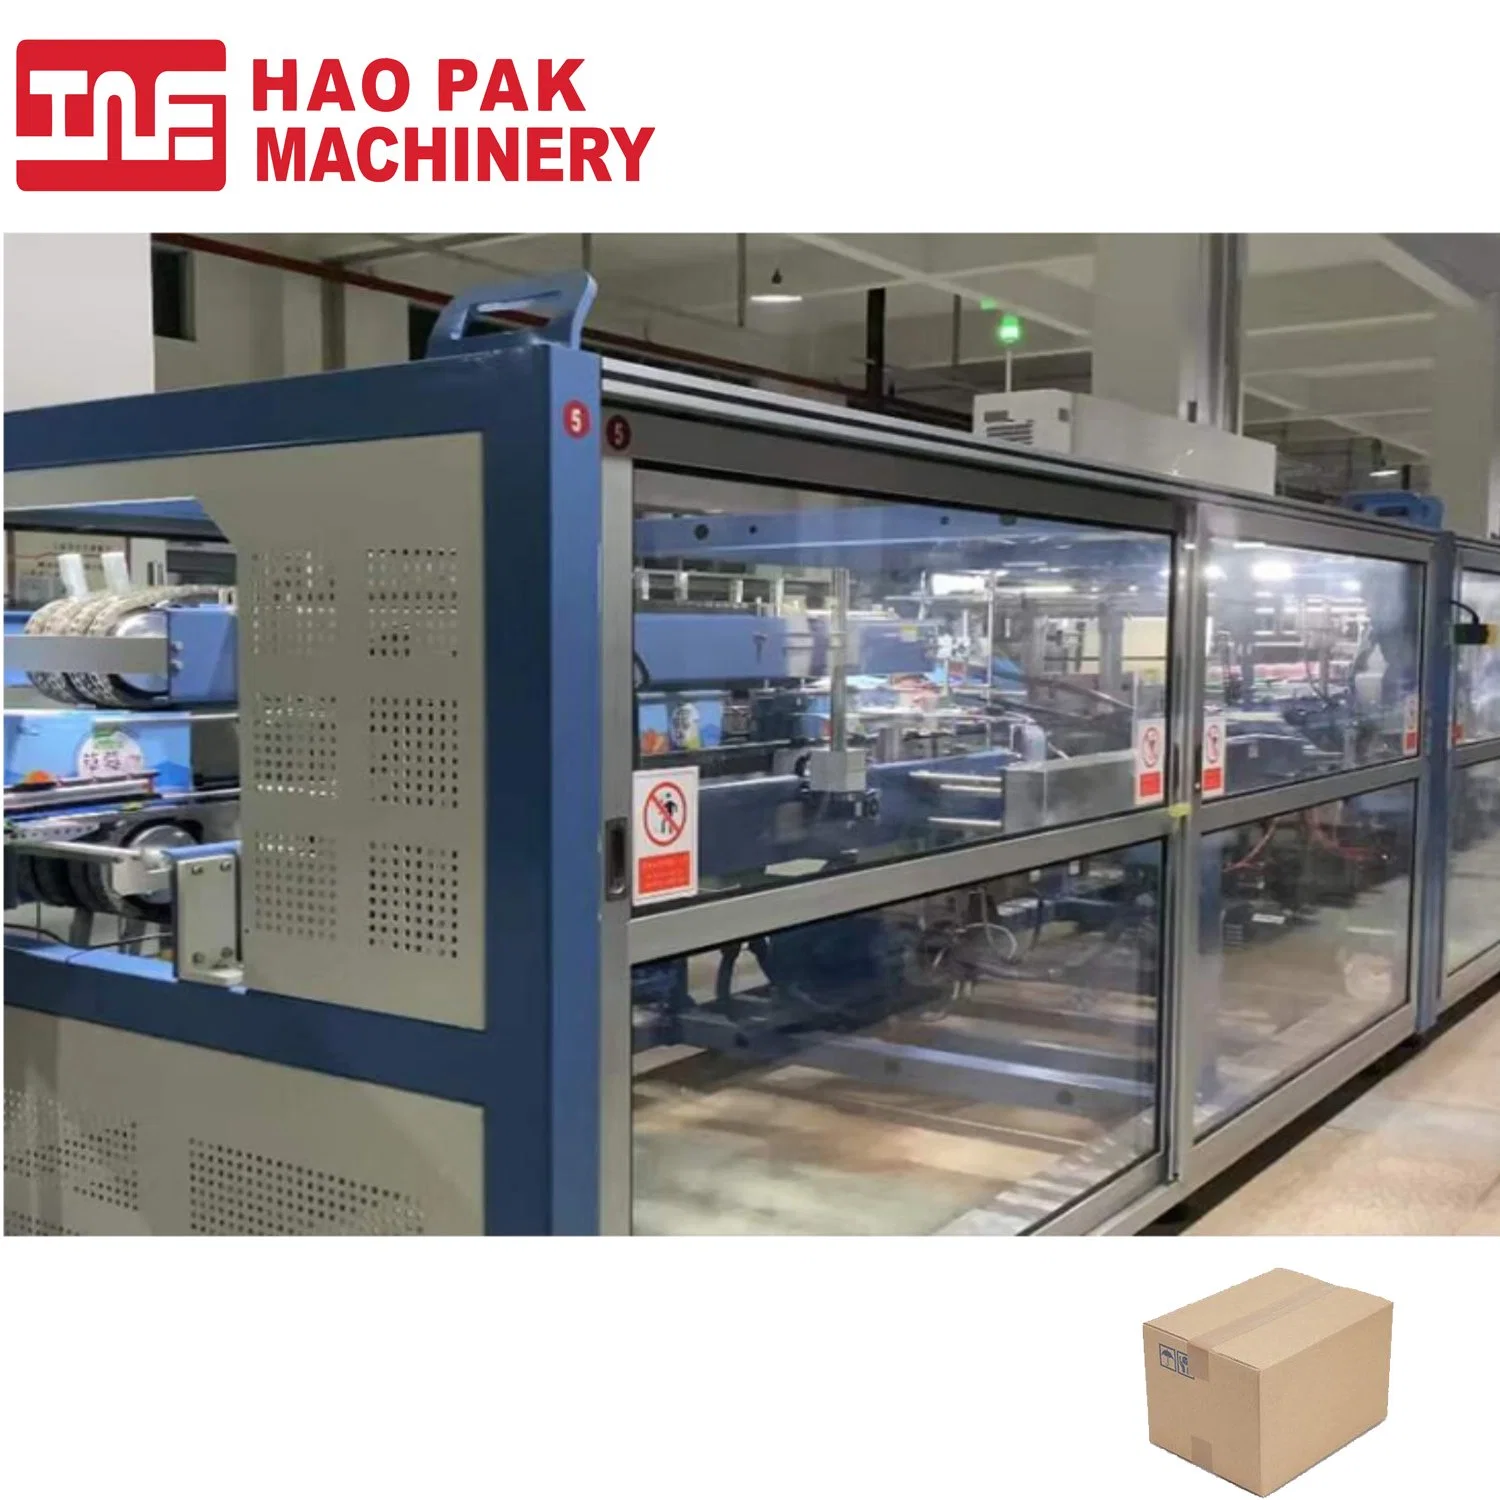 Hot Price Sale Other Packaging Machine Carton Waste Packing Machine for Bottle and Paper Baler